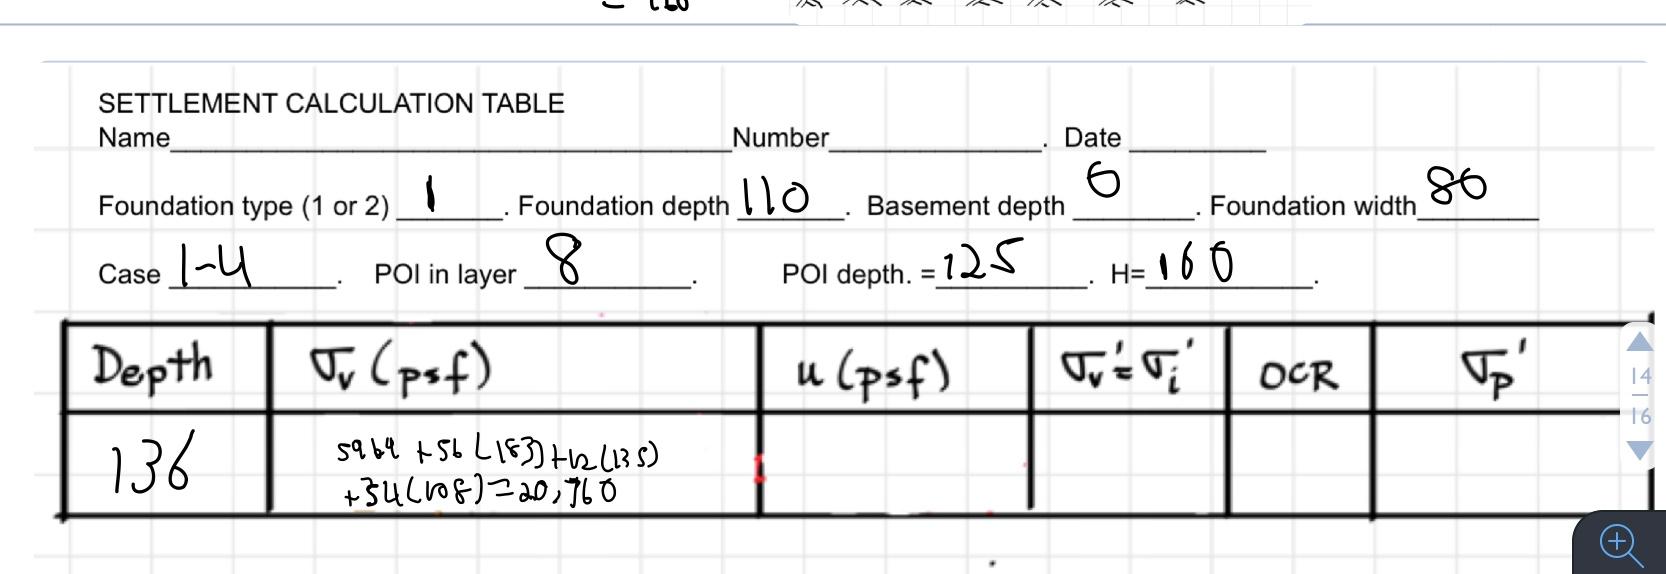 SETTLEMENT CALCULATION TABLE Name Number Date 6 Basement depth so Foundation width Foundation type (1 or 2). 1 Foundation dep